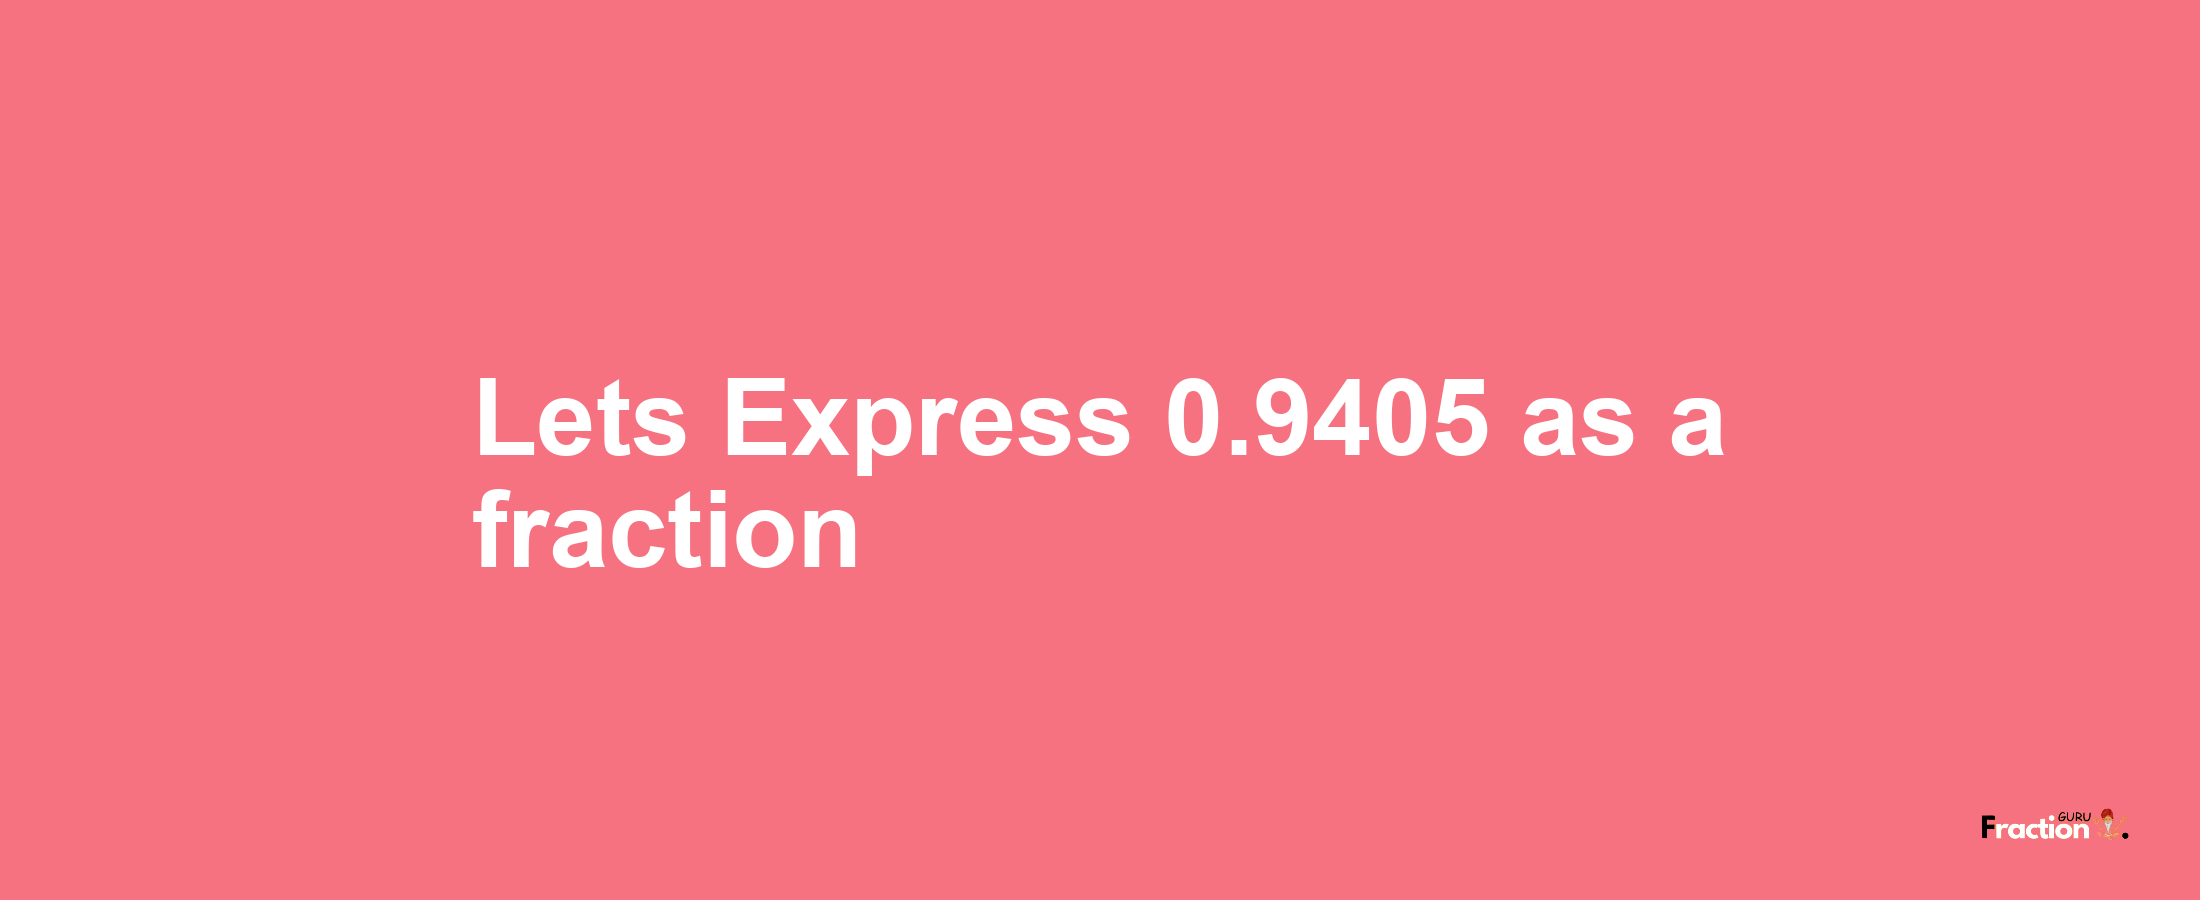 Lets Express 0.9405 as afraction